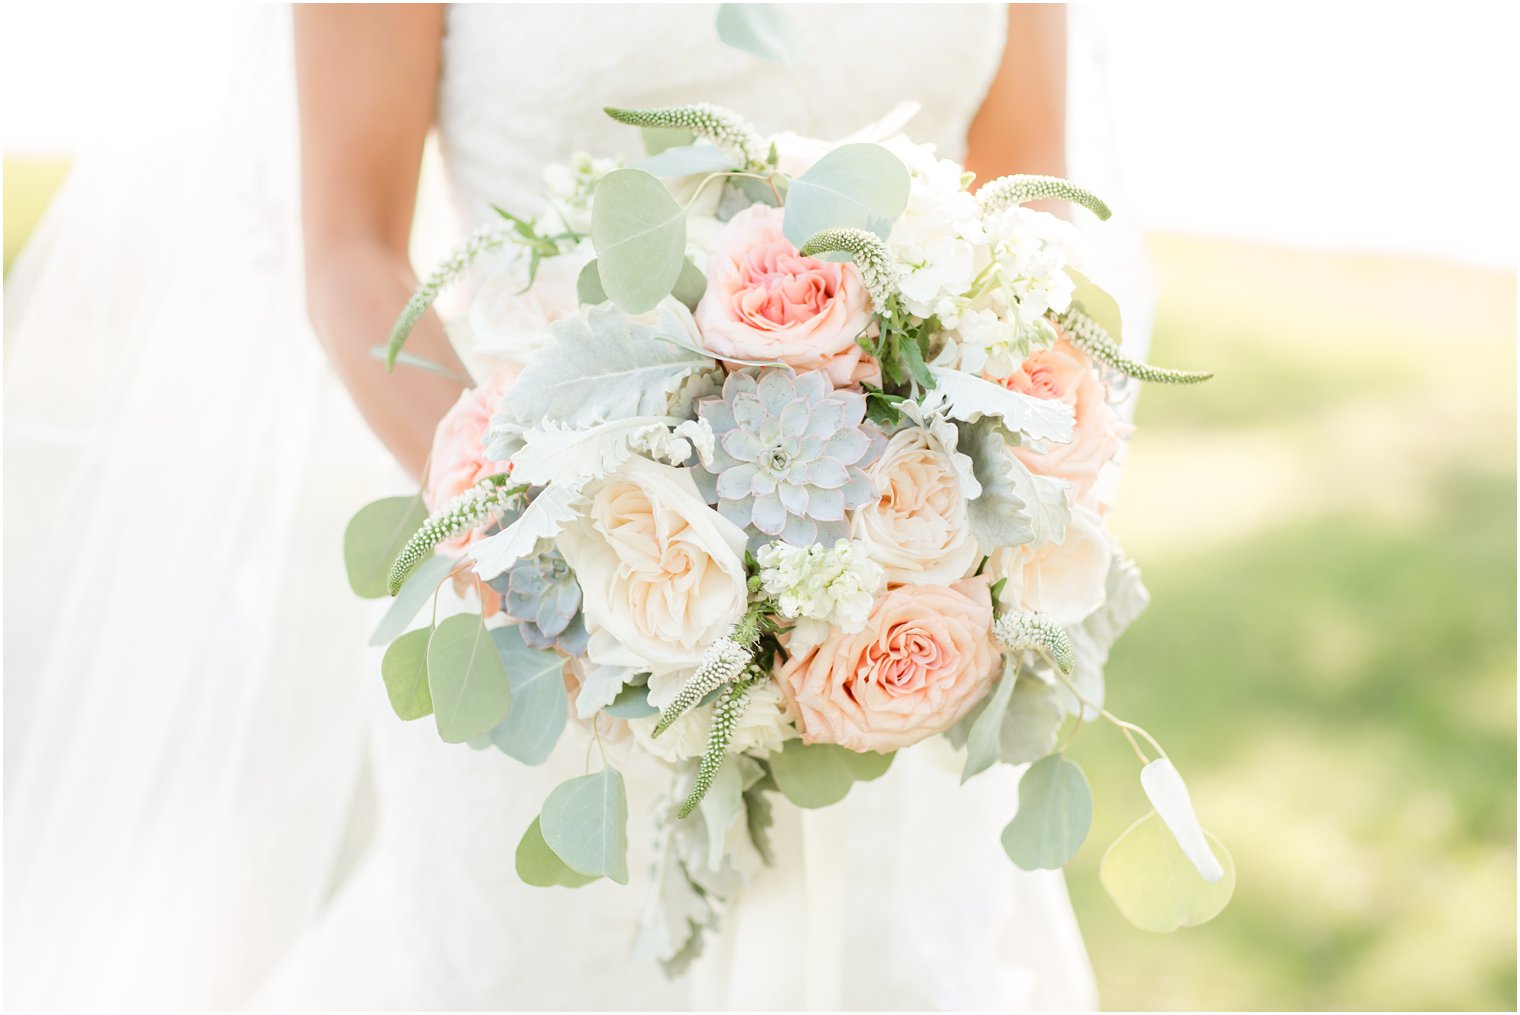 Organic bouquet with eucalyptus by Laurelwood Designs